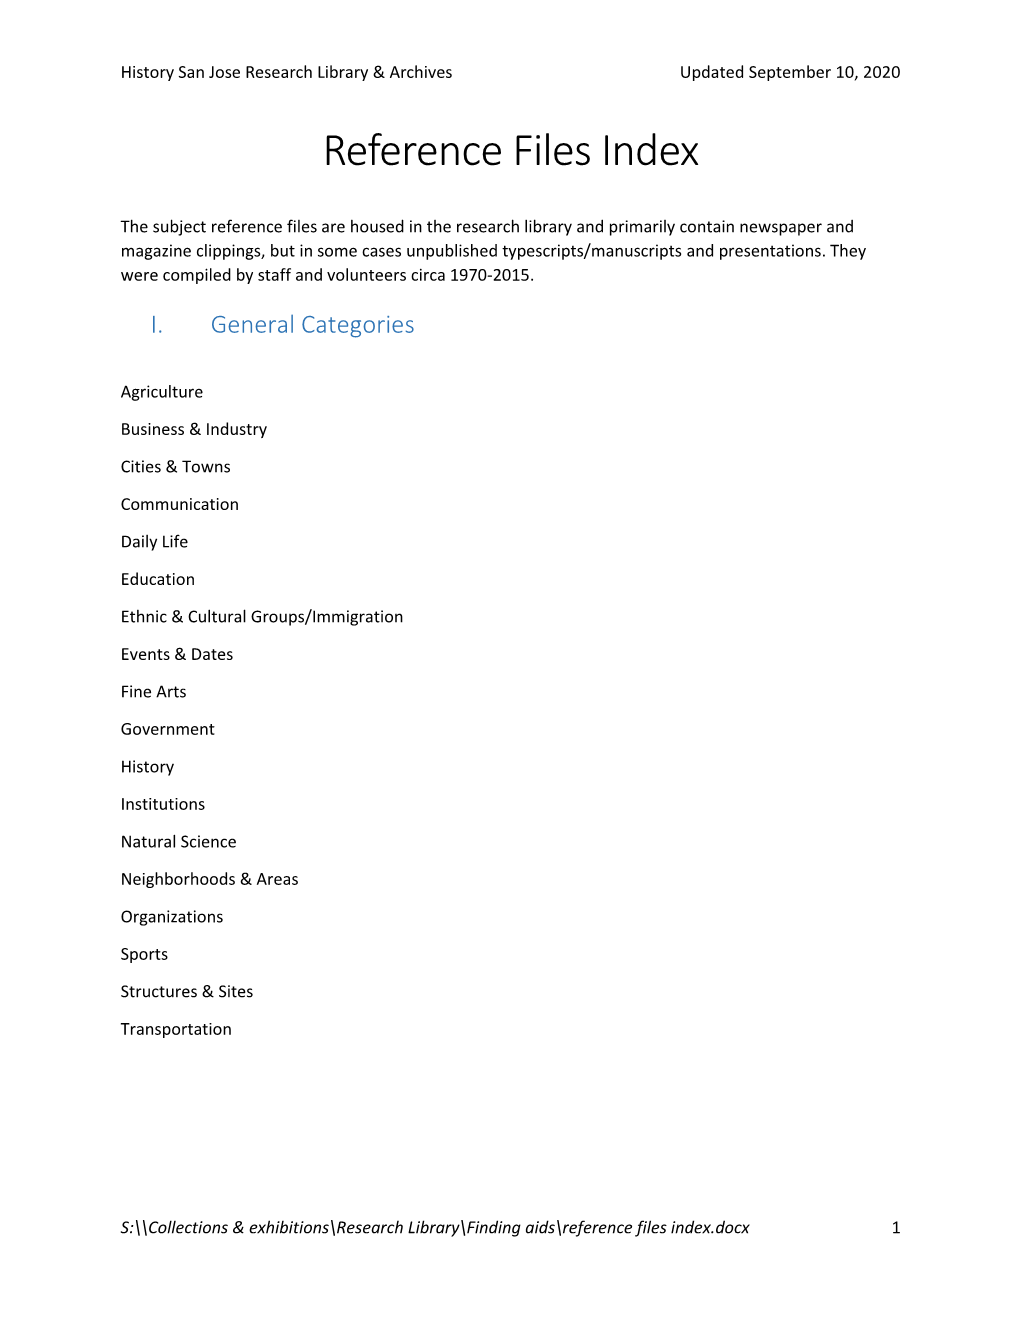 Reference Files Index